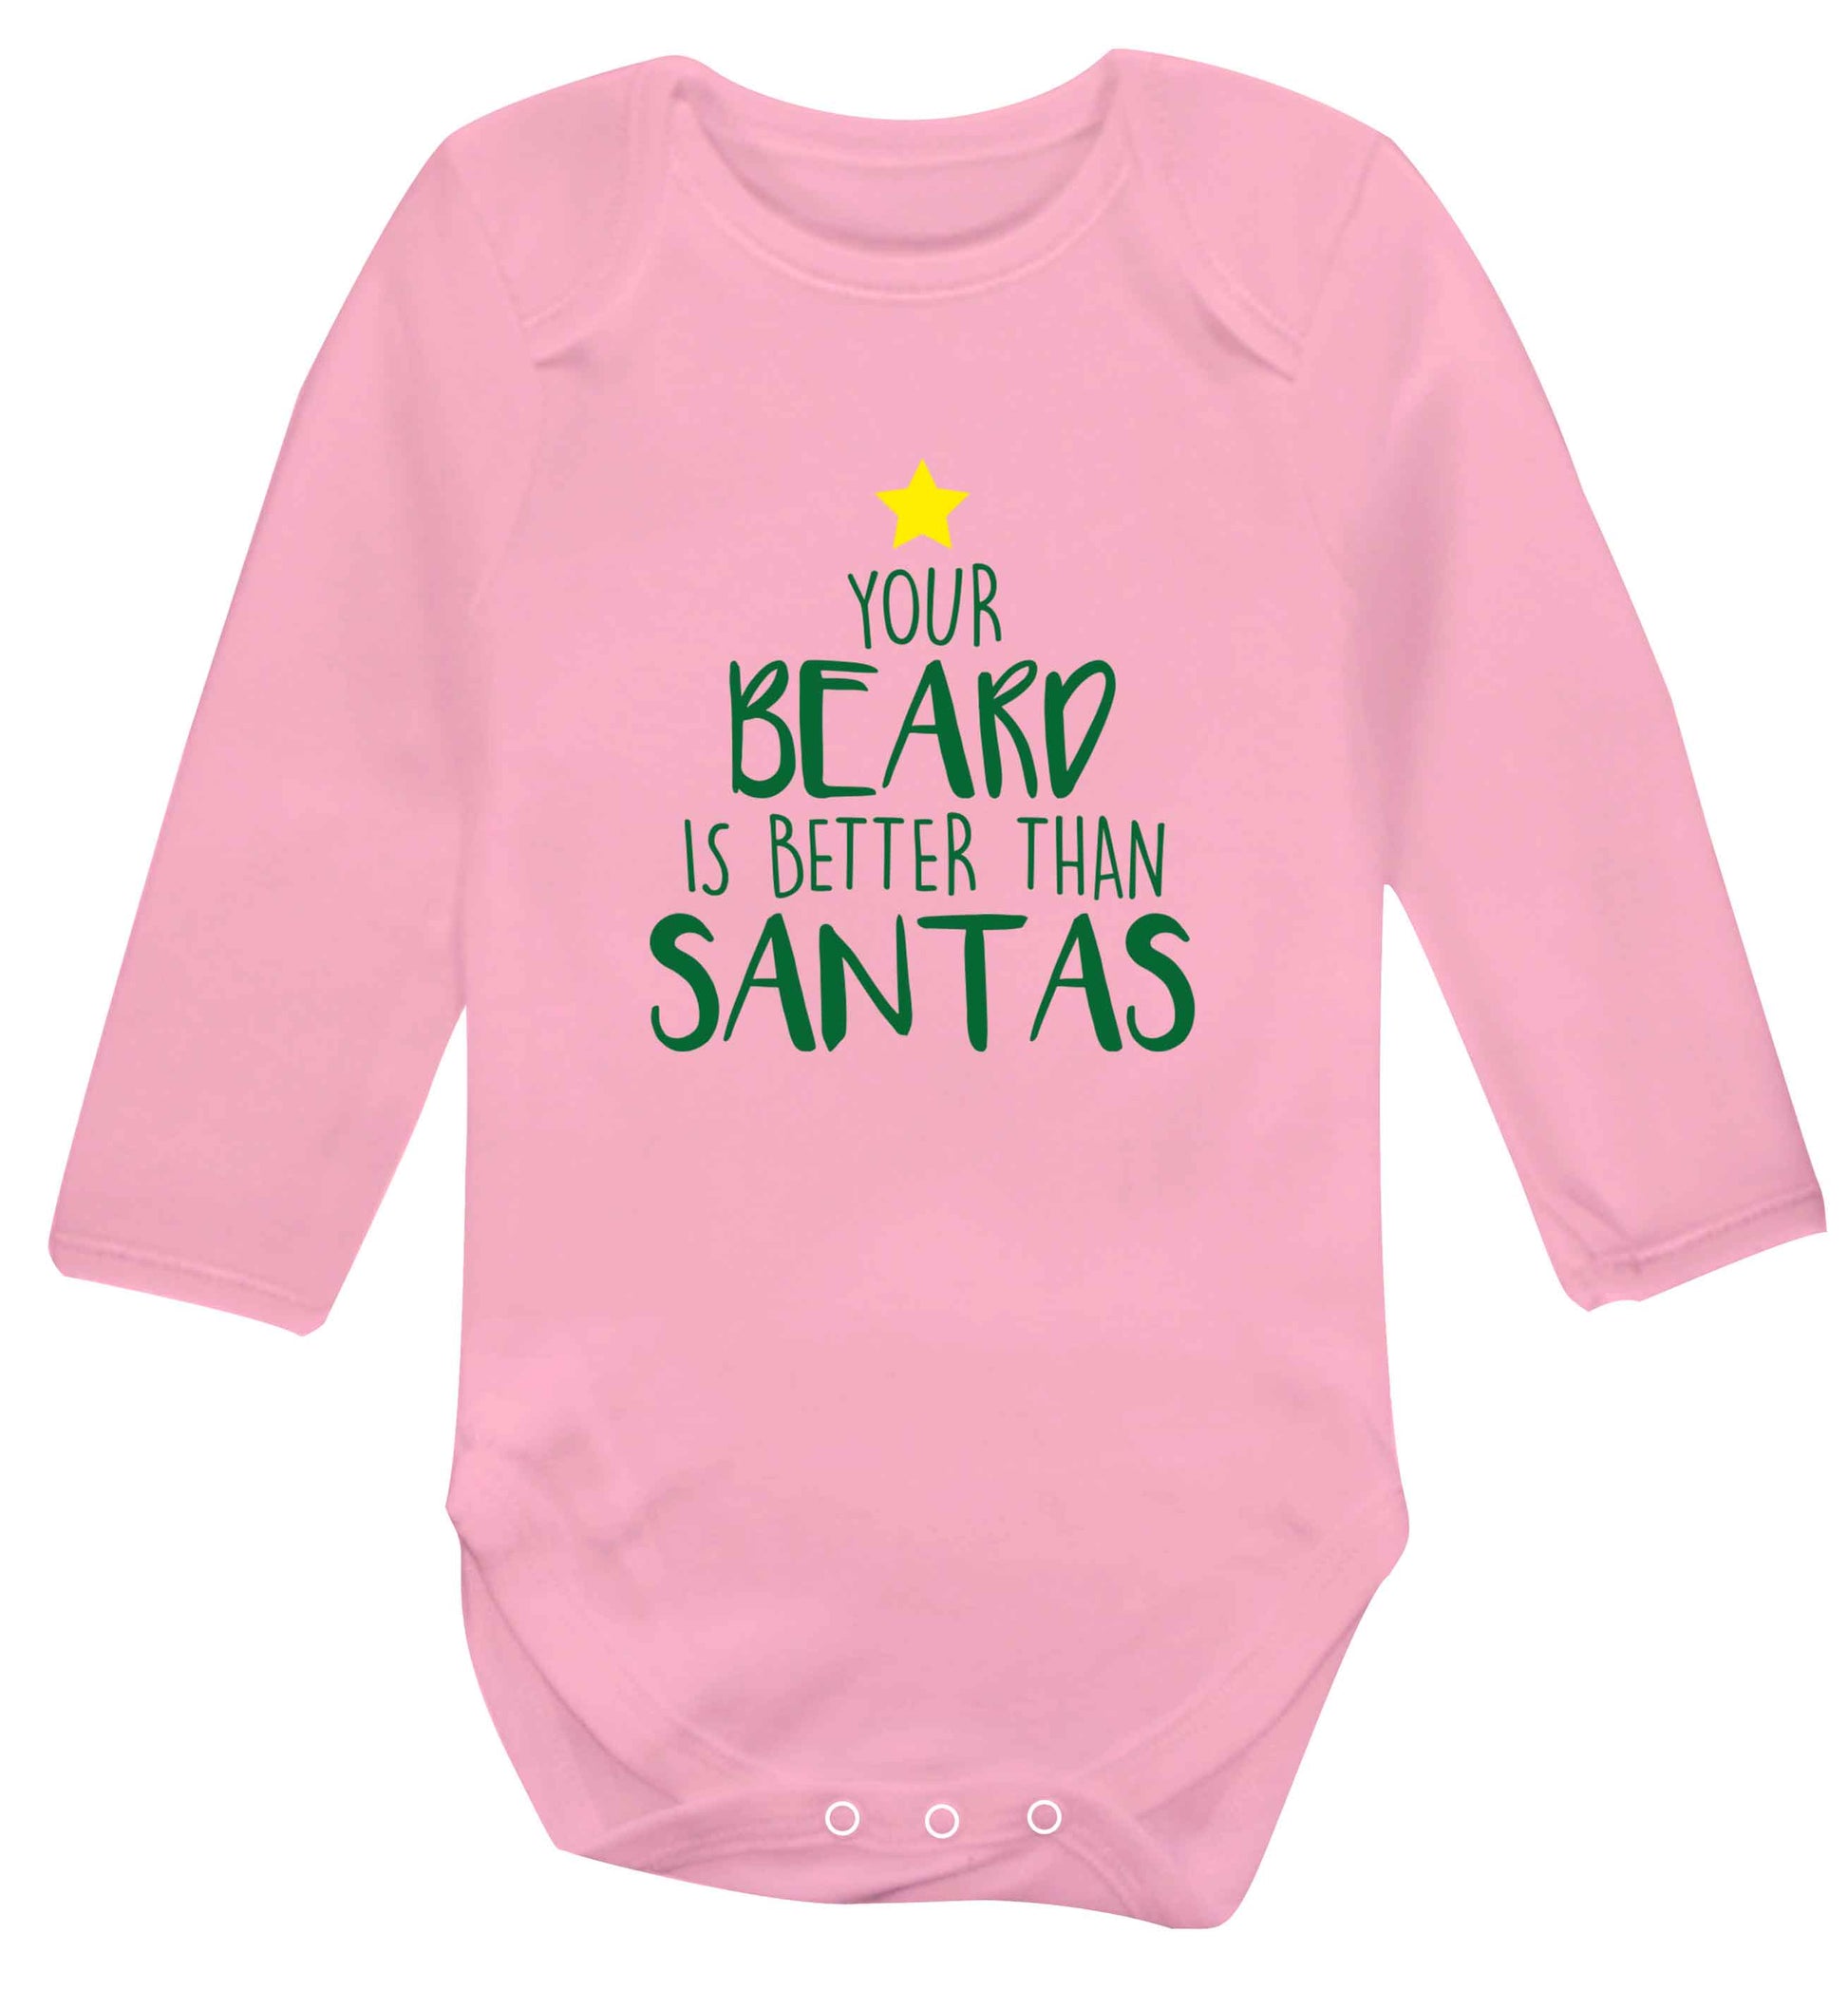 Your Beard Better than Santas baby vest long sleeved pale pink 6-12 months